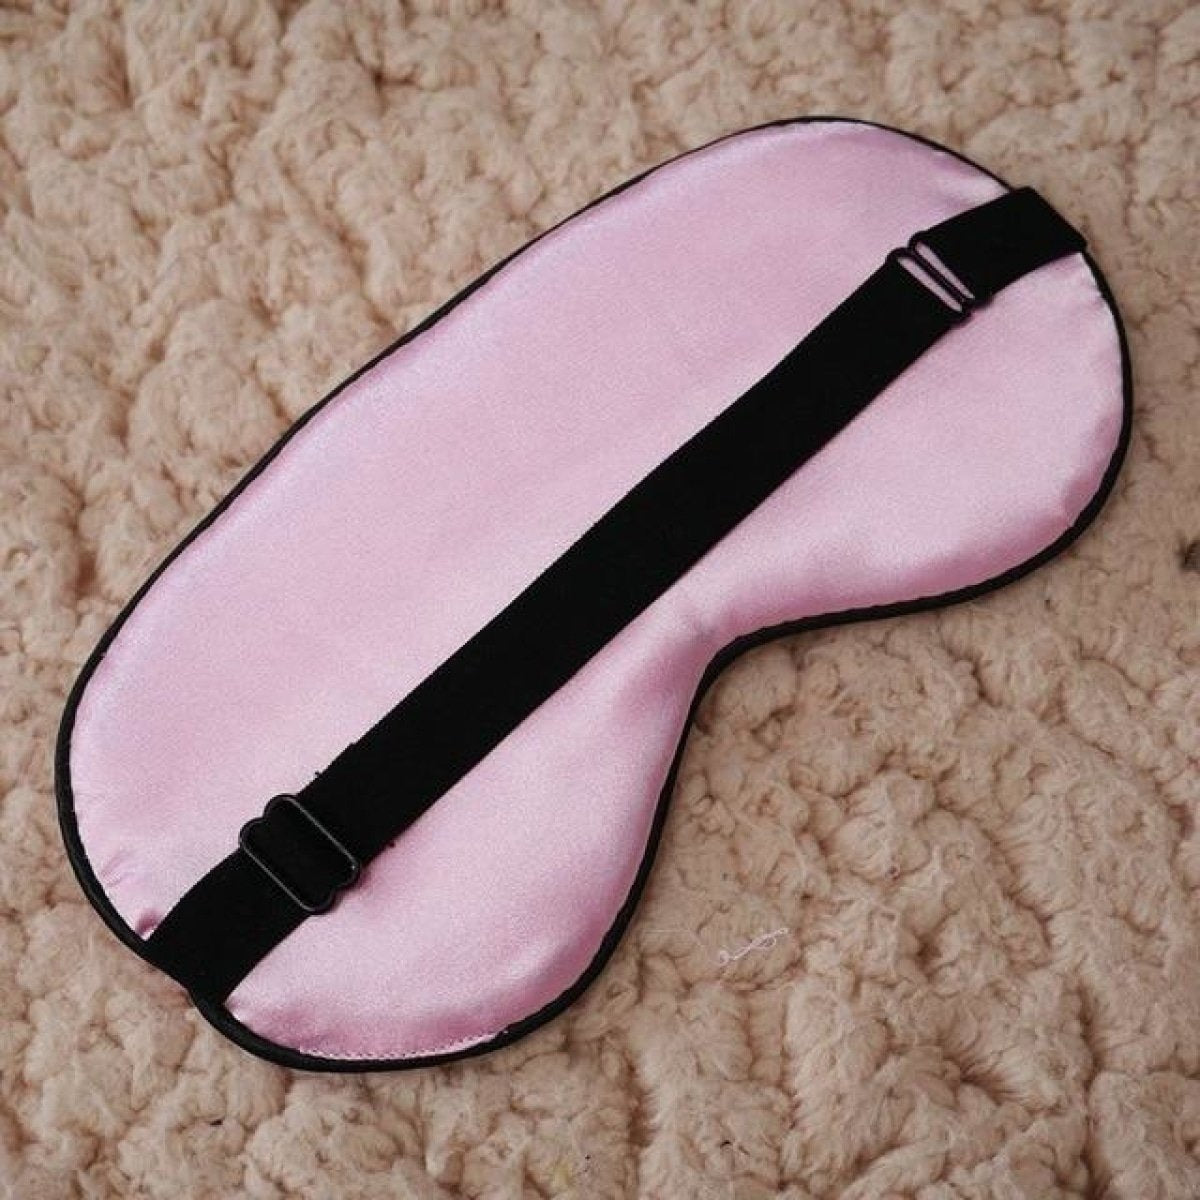 Silk Sleep Rest Eye Mask Padded Shade Cover Travel Relax Aid | Asia Sell